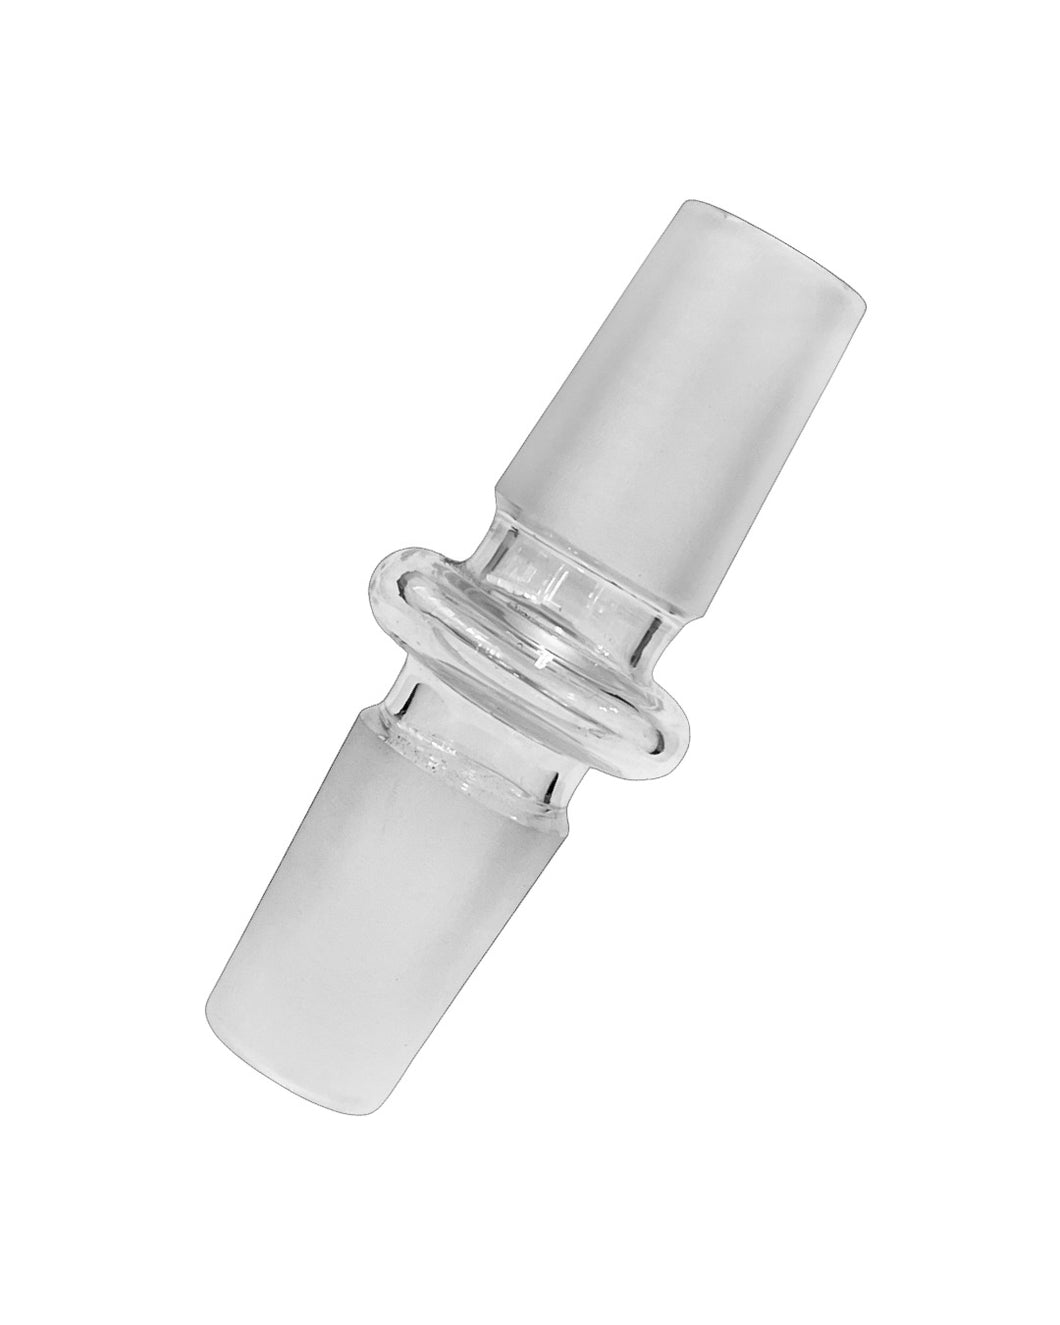 An 18mm Male to 18mm Male Glass Adapter.